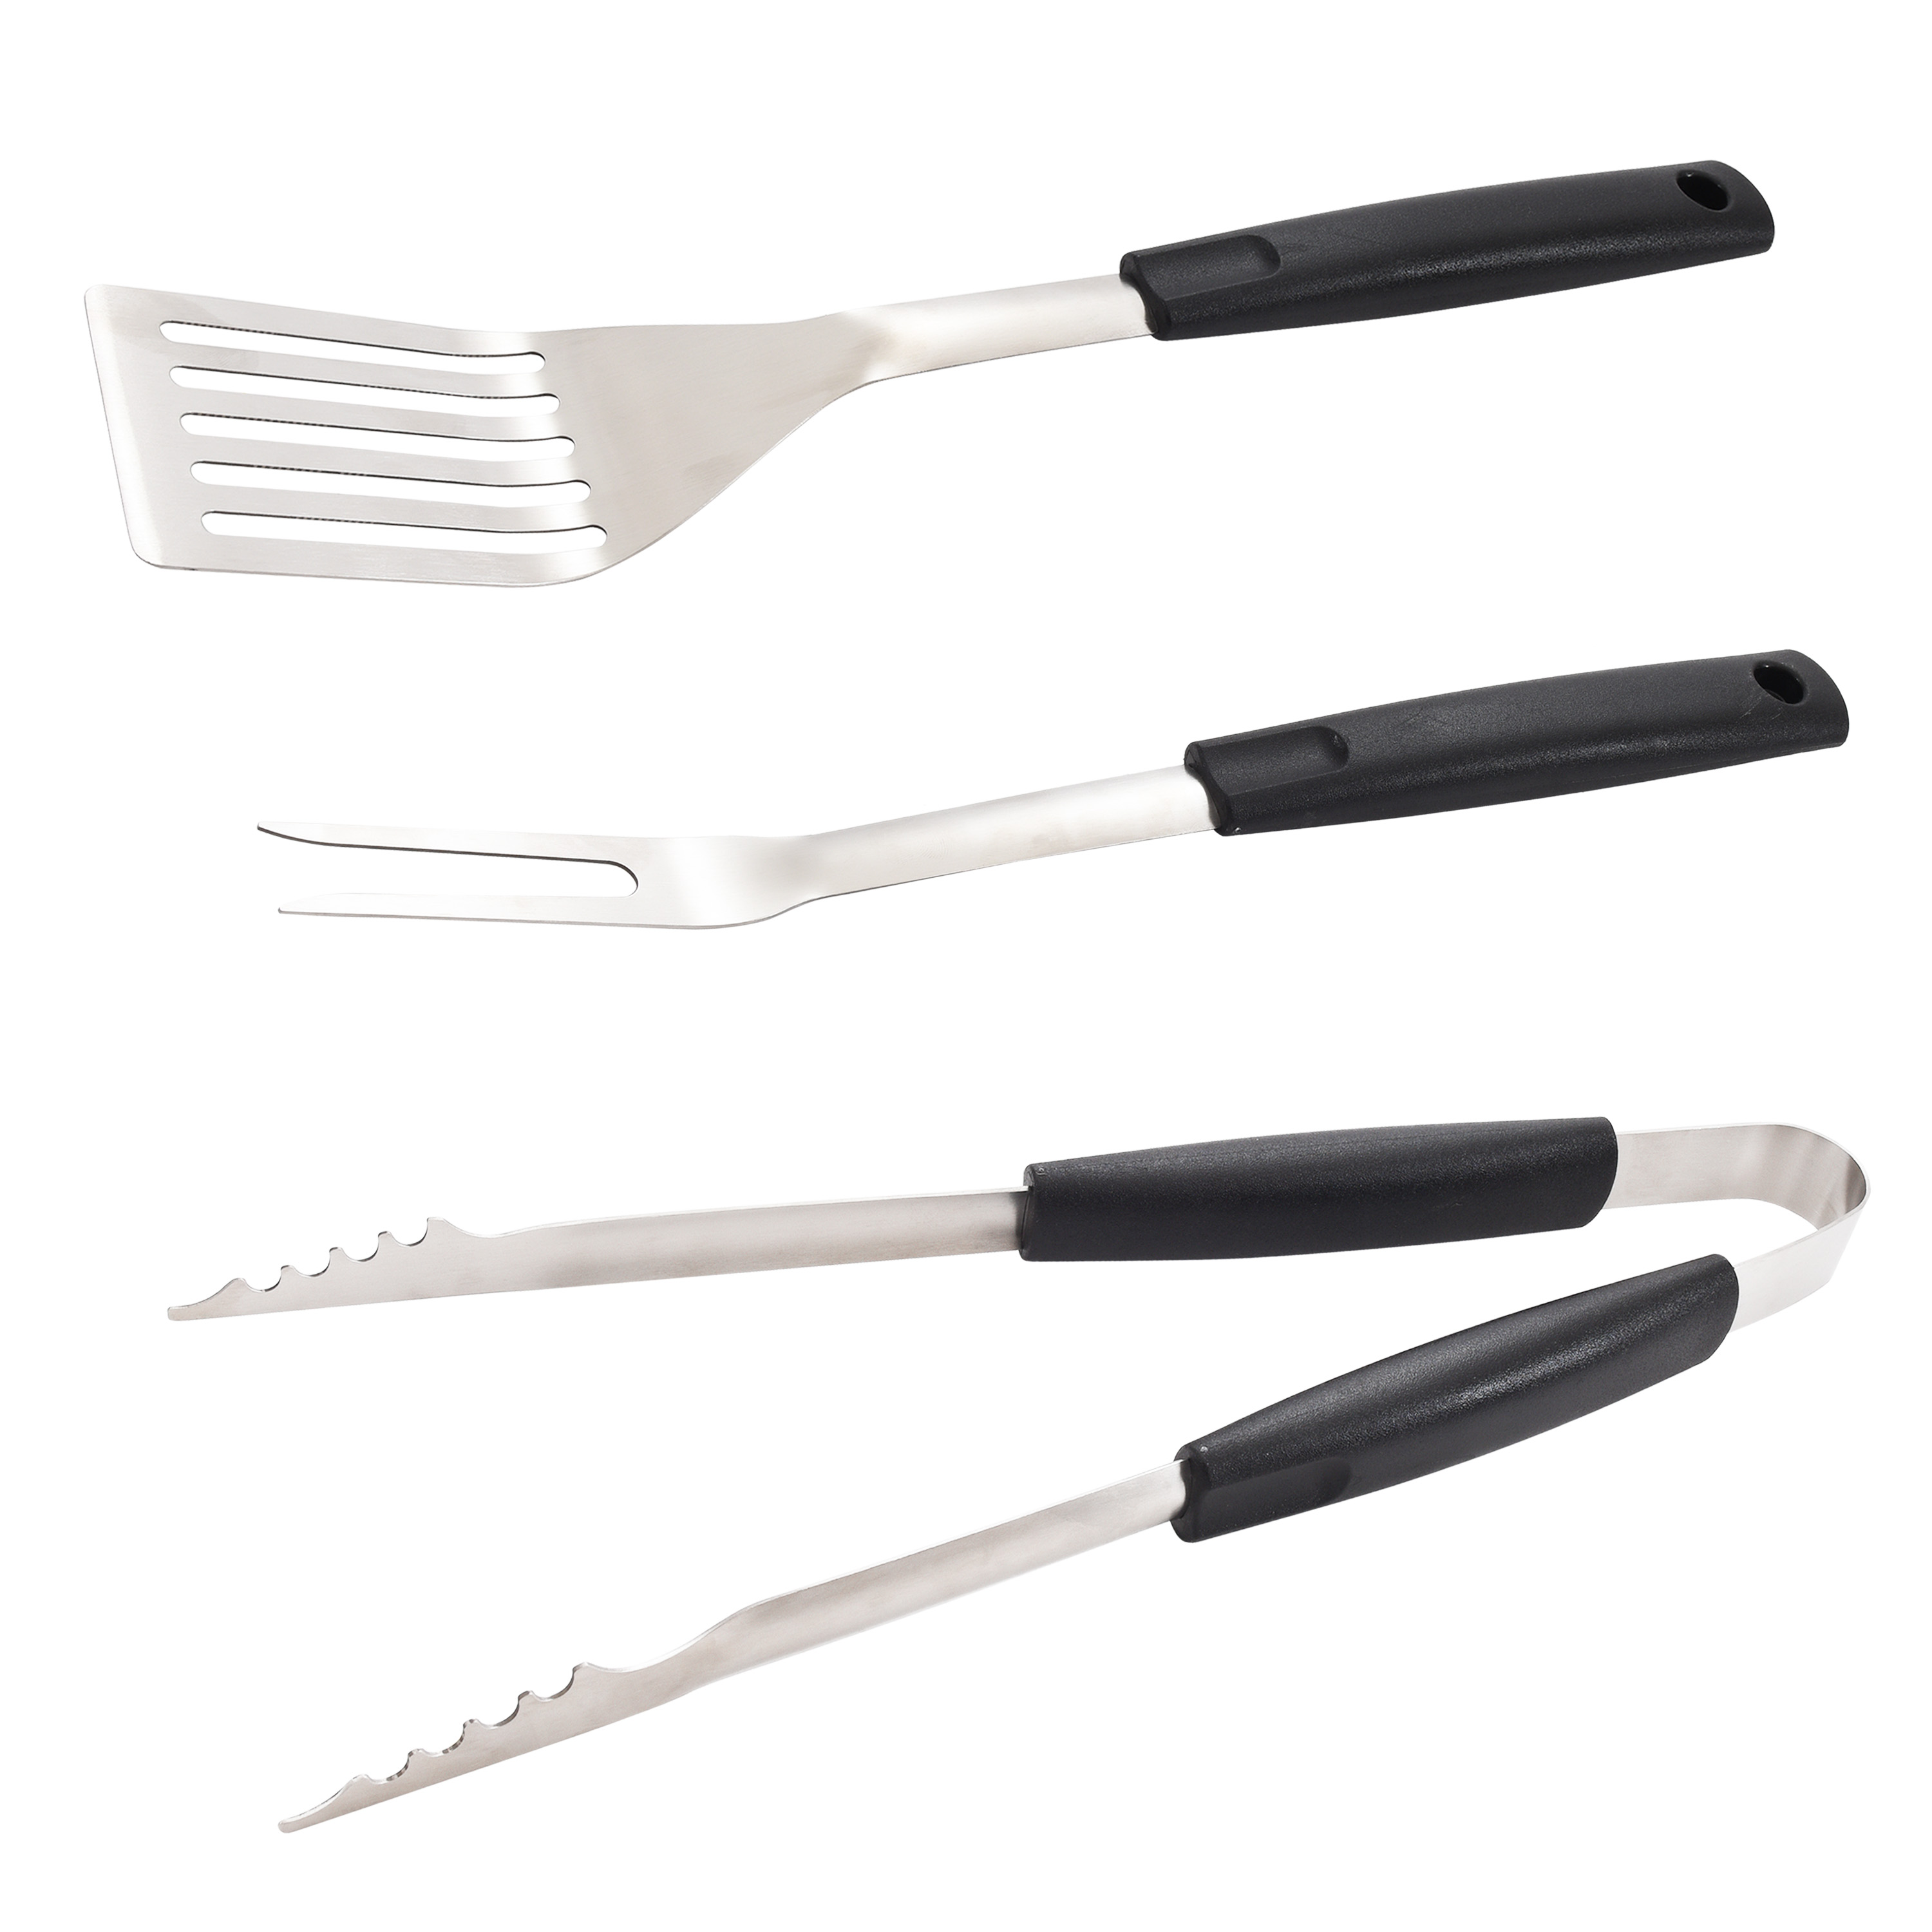 Mainstays 3 Piece Stainless Steel Barbecue Grill Tool Set - image 1 of 10